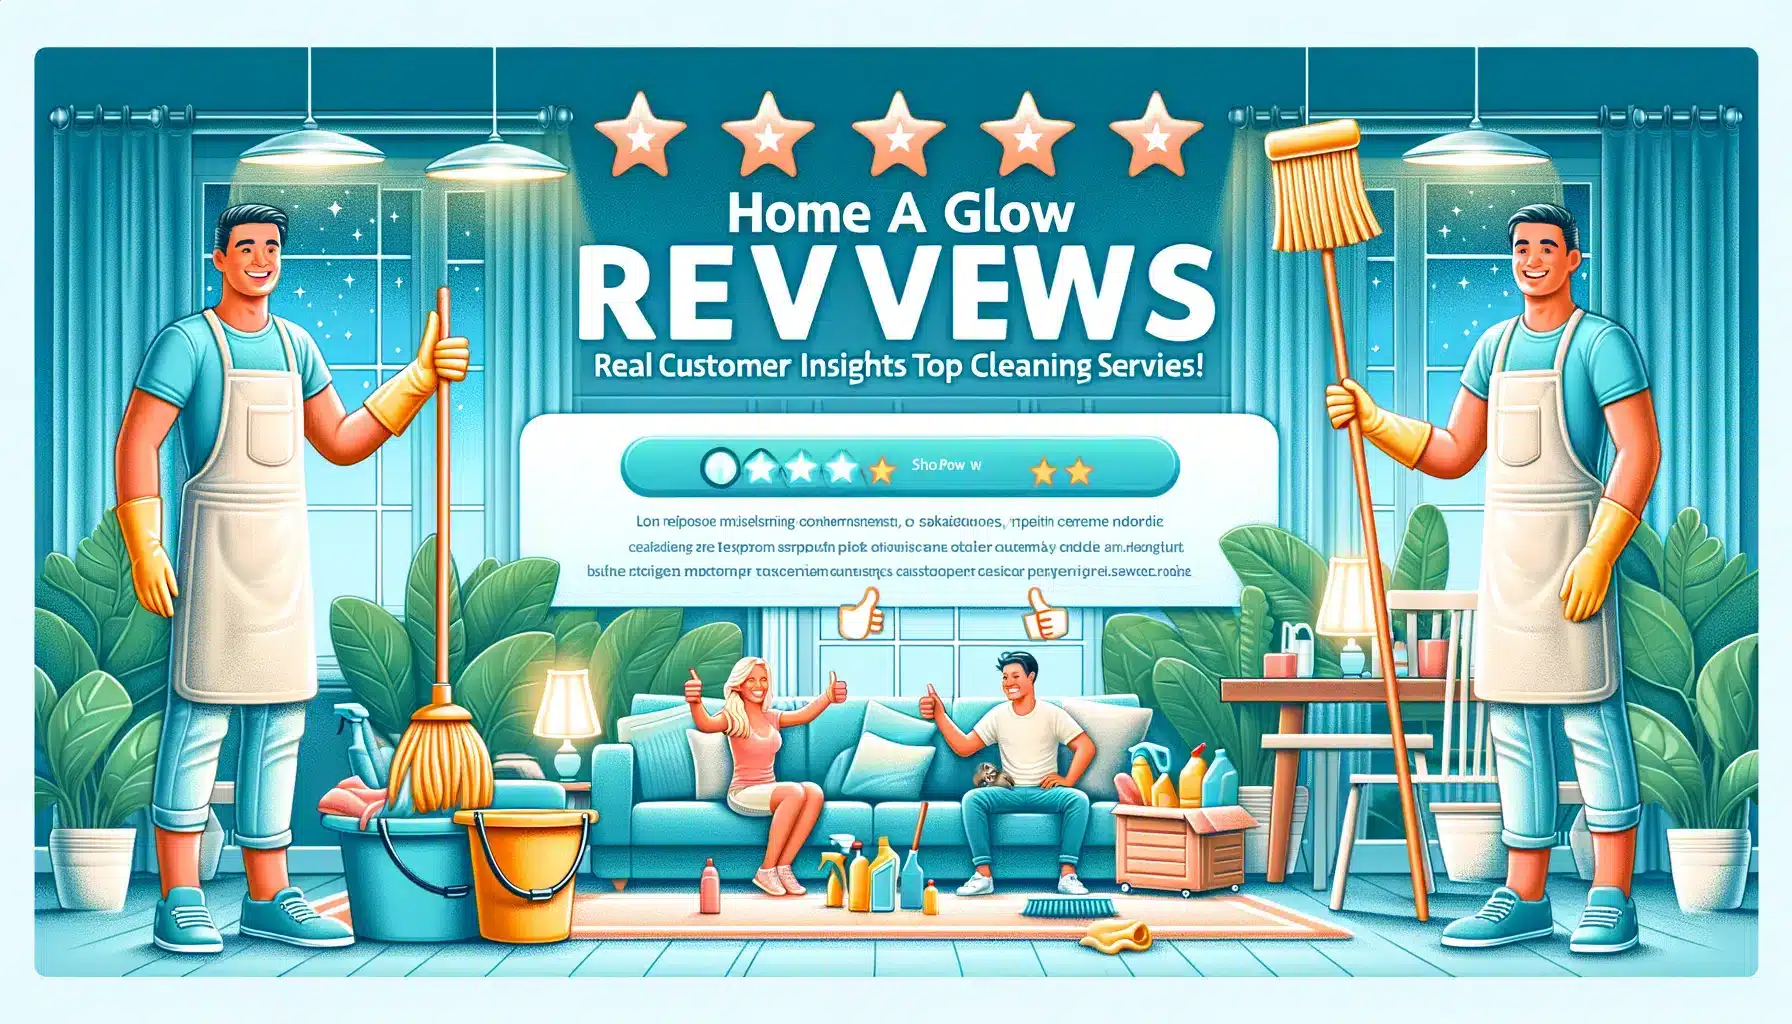 HomeAglow Review